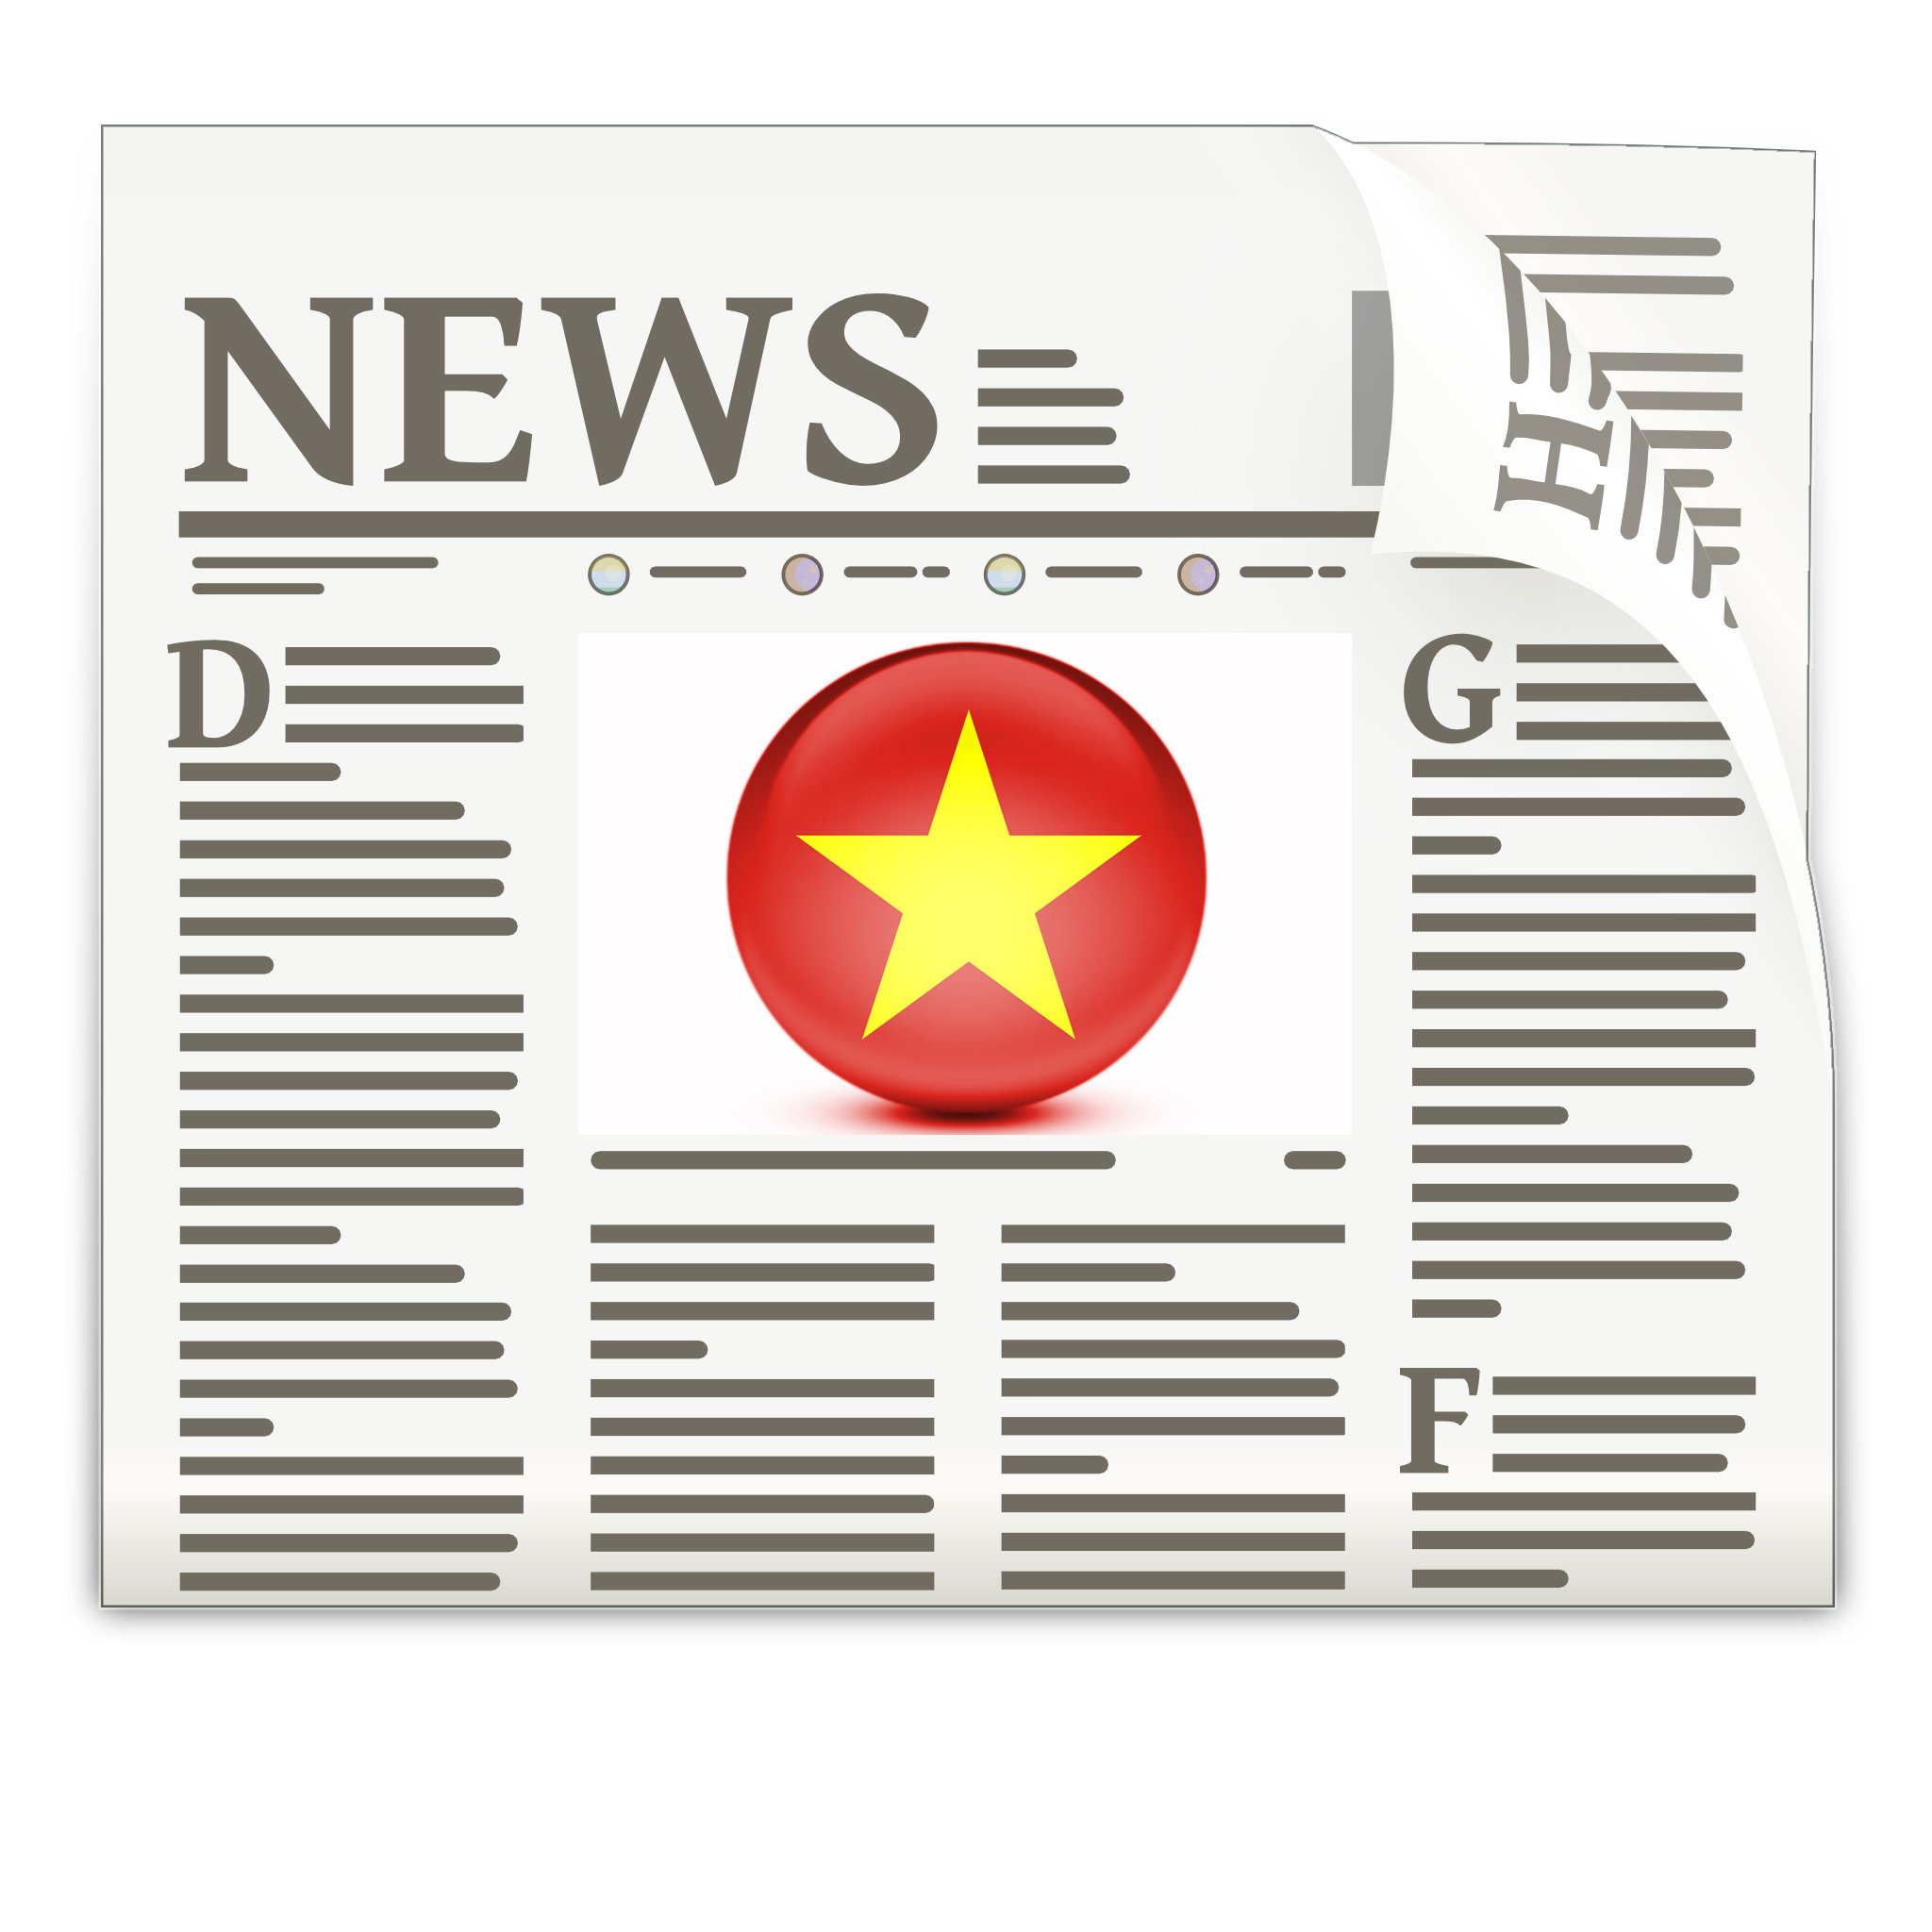 #Vietnam News in English #iOS https://t.co/Phw2GxnvDm #Android https://t.co/xPoPN5BJMM #hochiminhcity